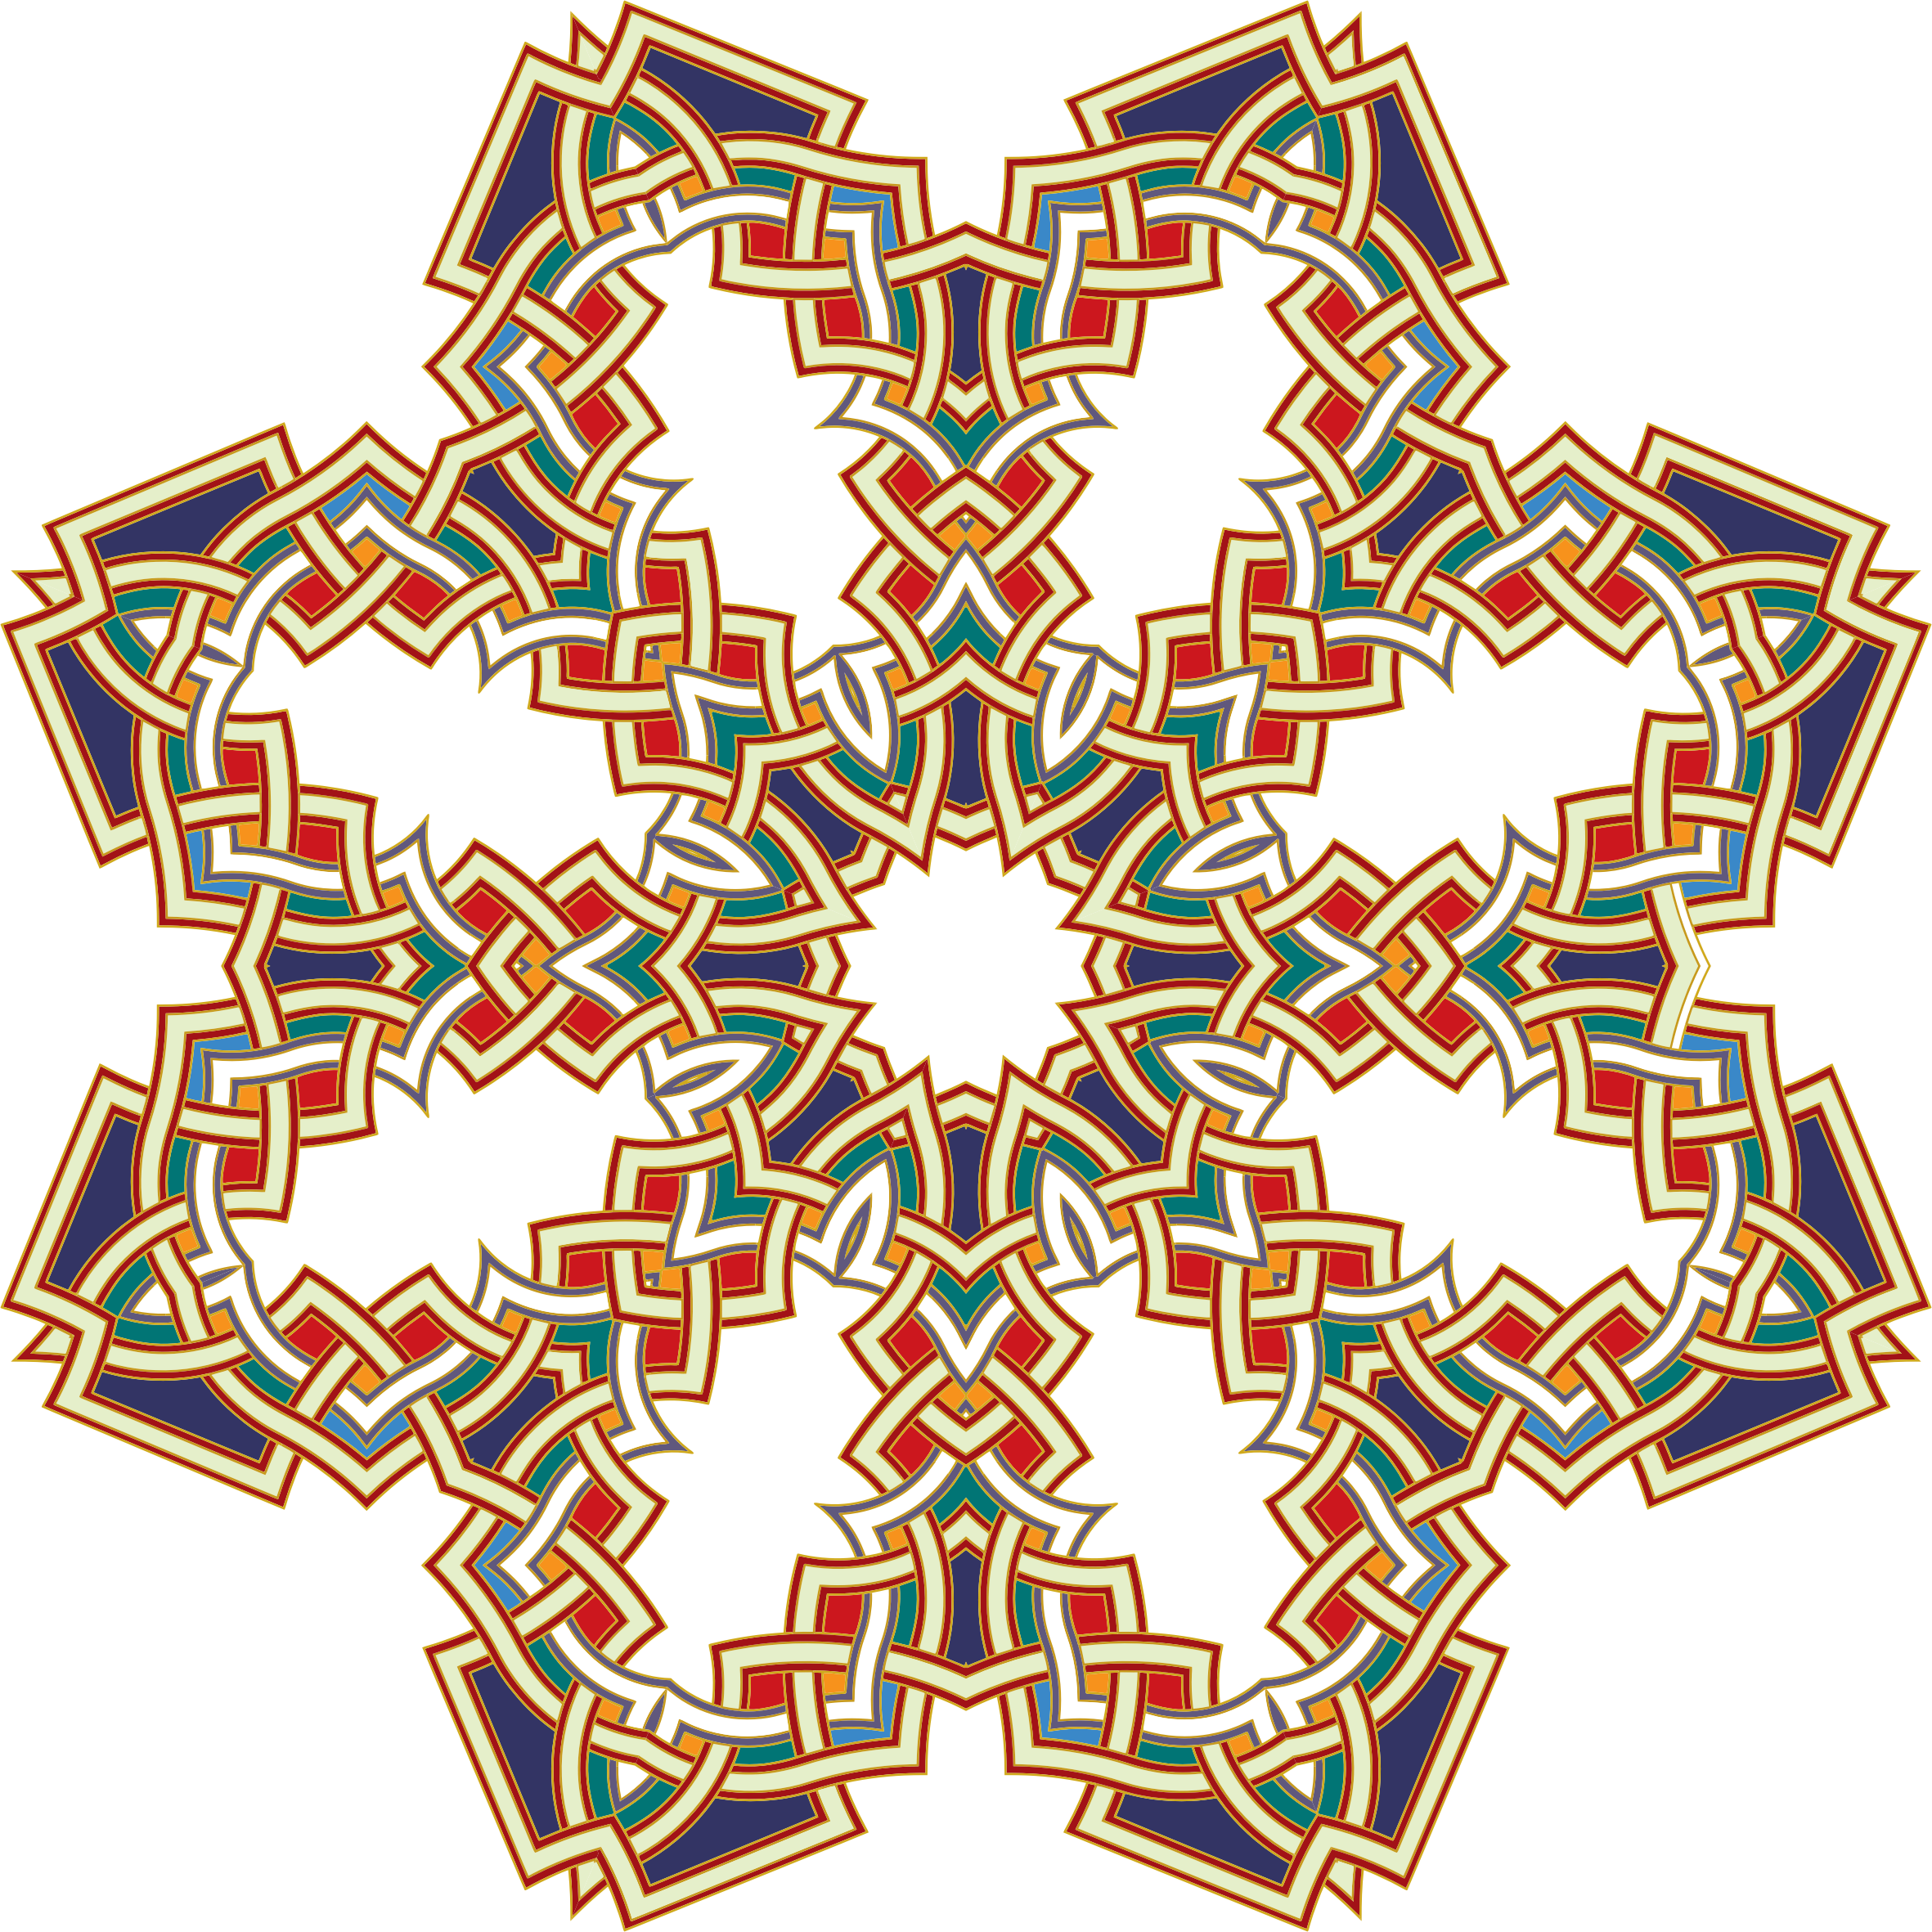 Free Islamic Design Png, Download Free Islamic Design Png png images